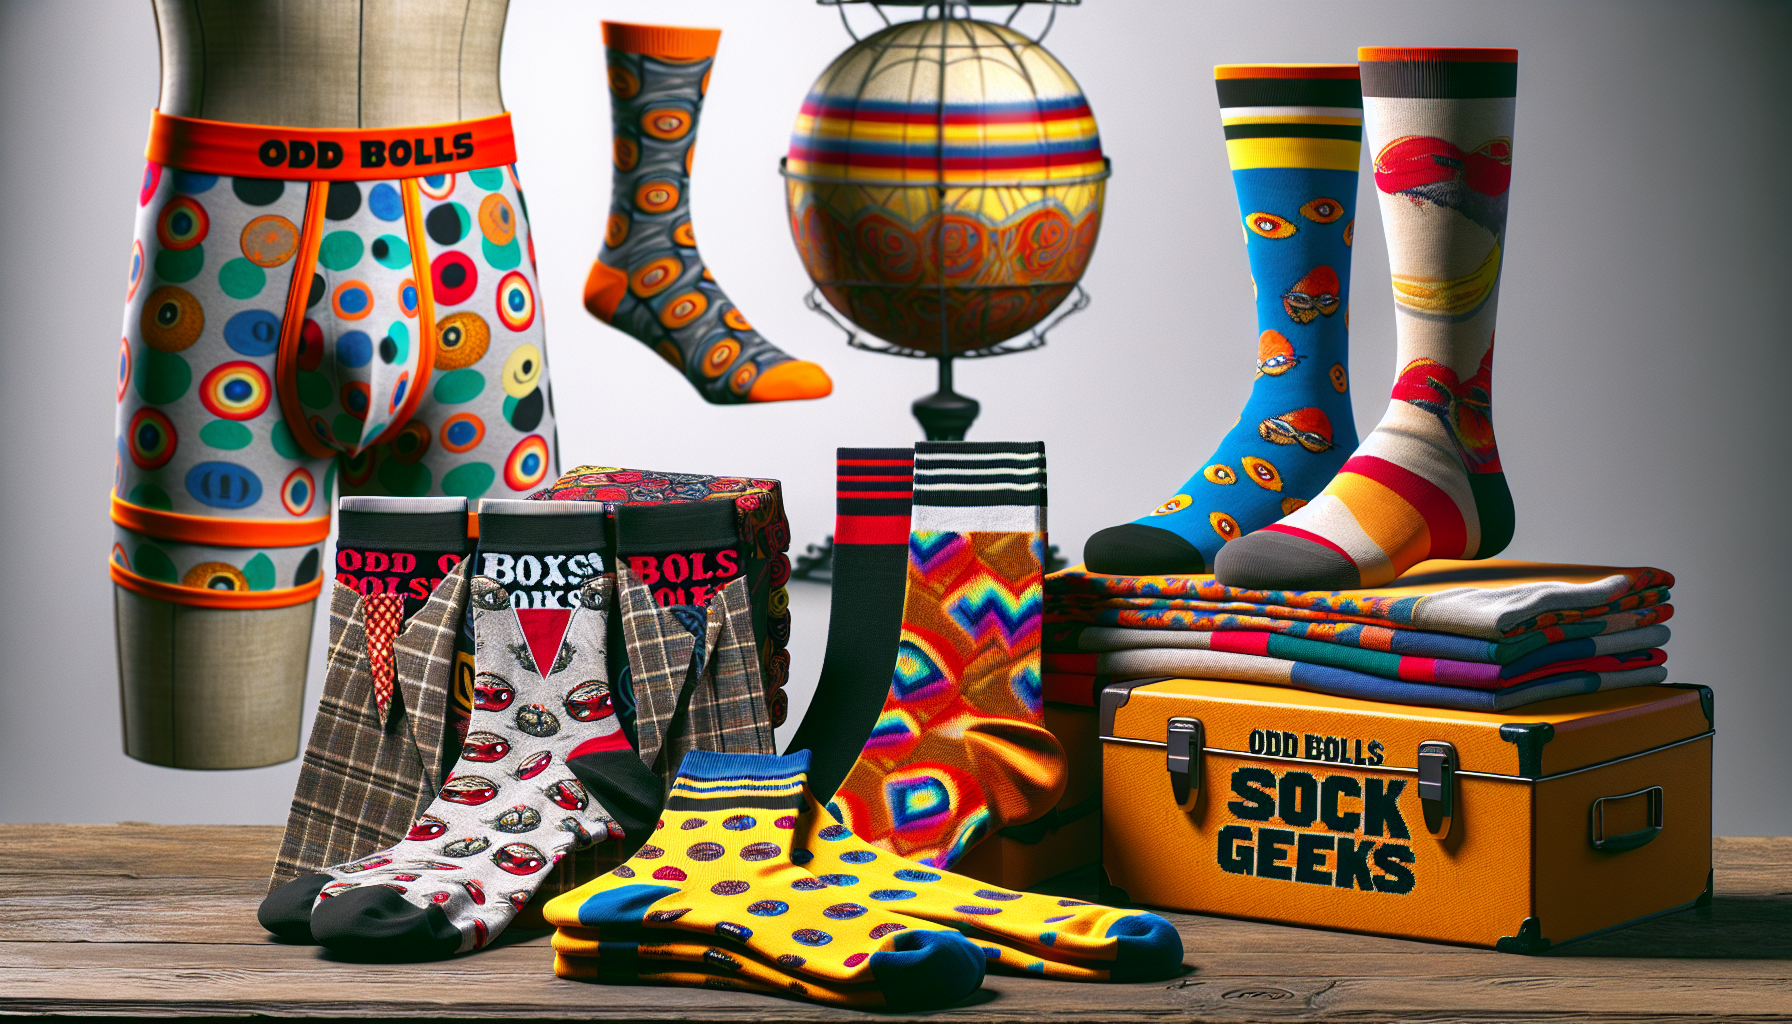 Odd Balls | Sock Geeks | unique boxers | fun socks | bold undergarments | quirky designs | standout styles | colorful socks | personality in fashion | trendy undergarments